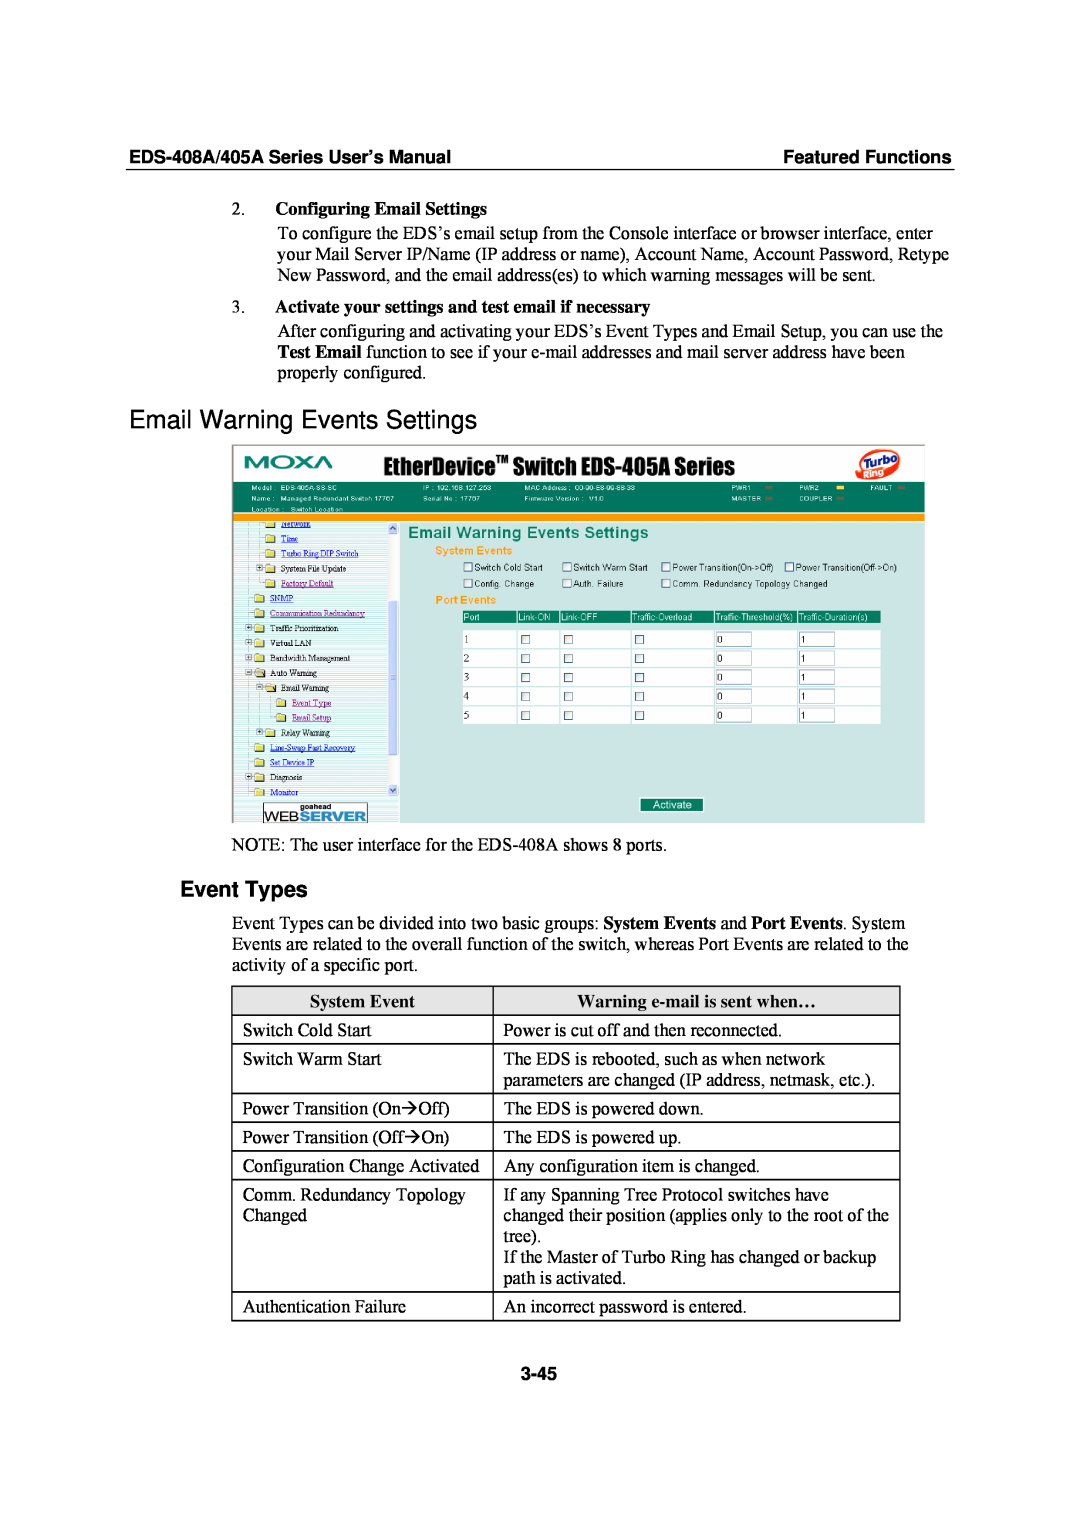 Moxa Technologies EDS-408A Email Warning Events Settings, Event Types, Configuring Email Settings, System Event, 3-45 